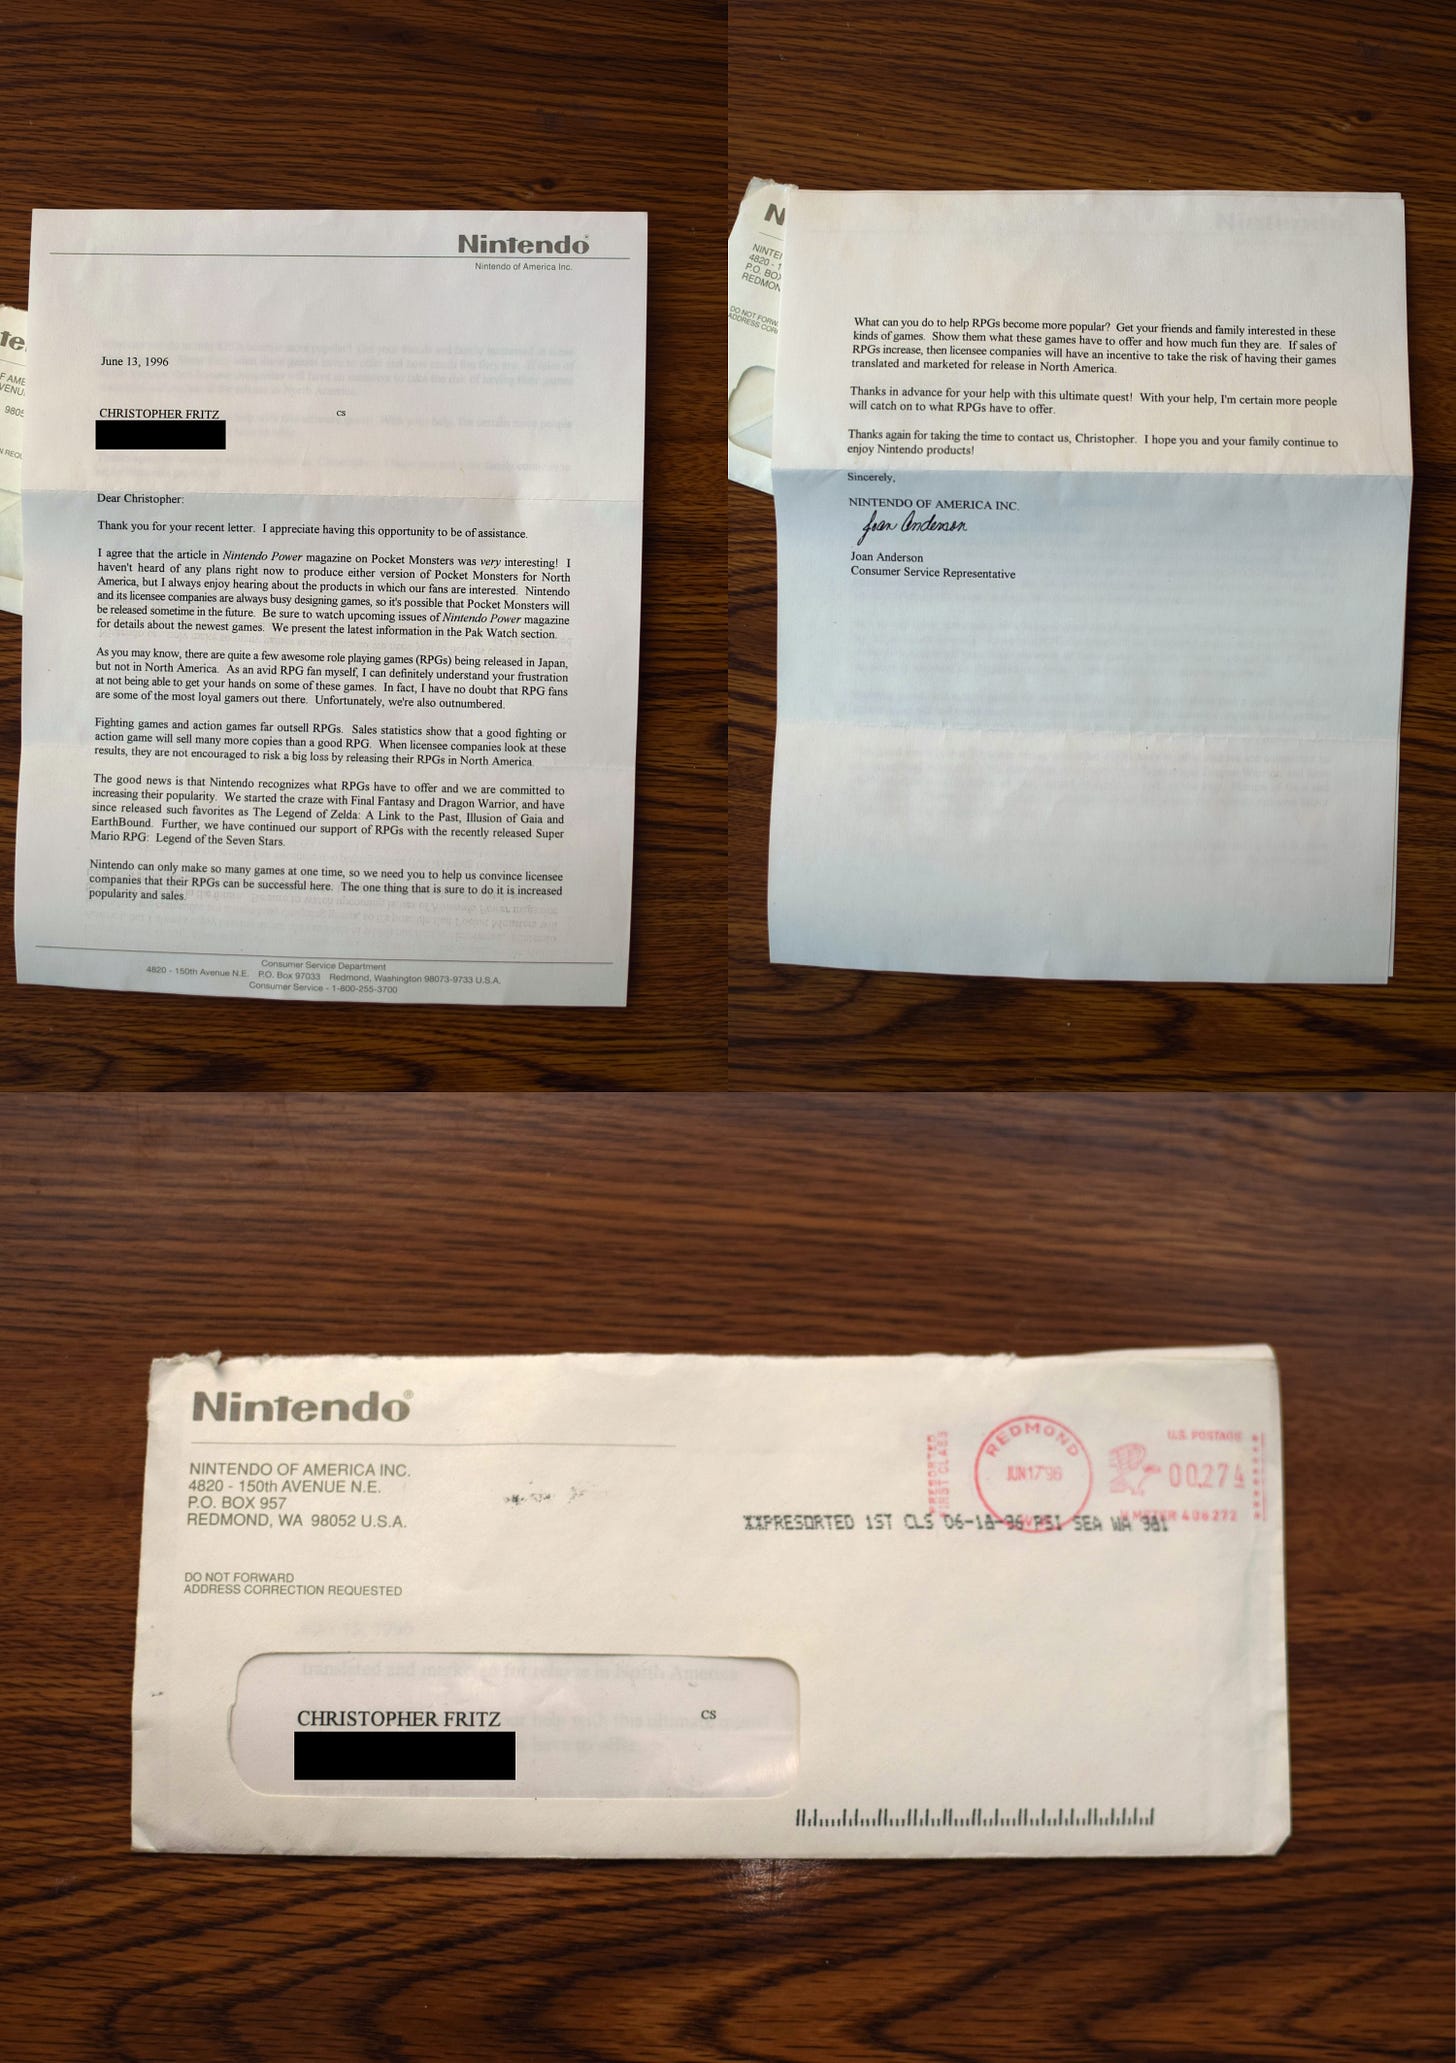 In June 1996, Chris received a letter from Nintendo of America in response to his question, on whether Pocket Monsters would ever be released in the United States